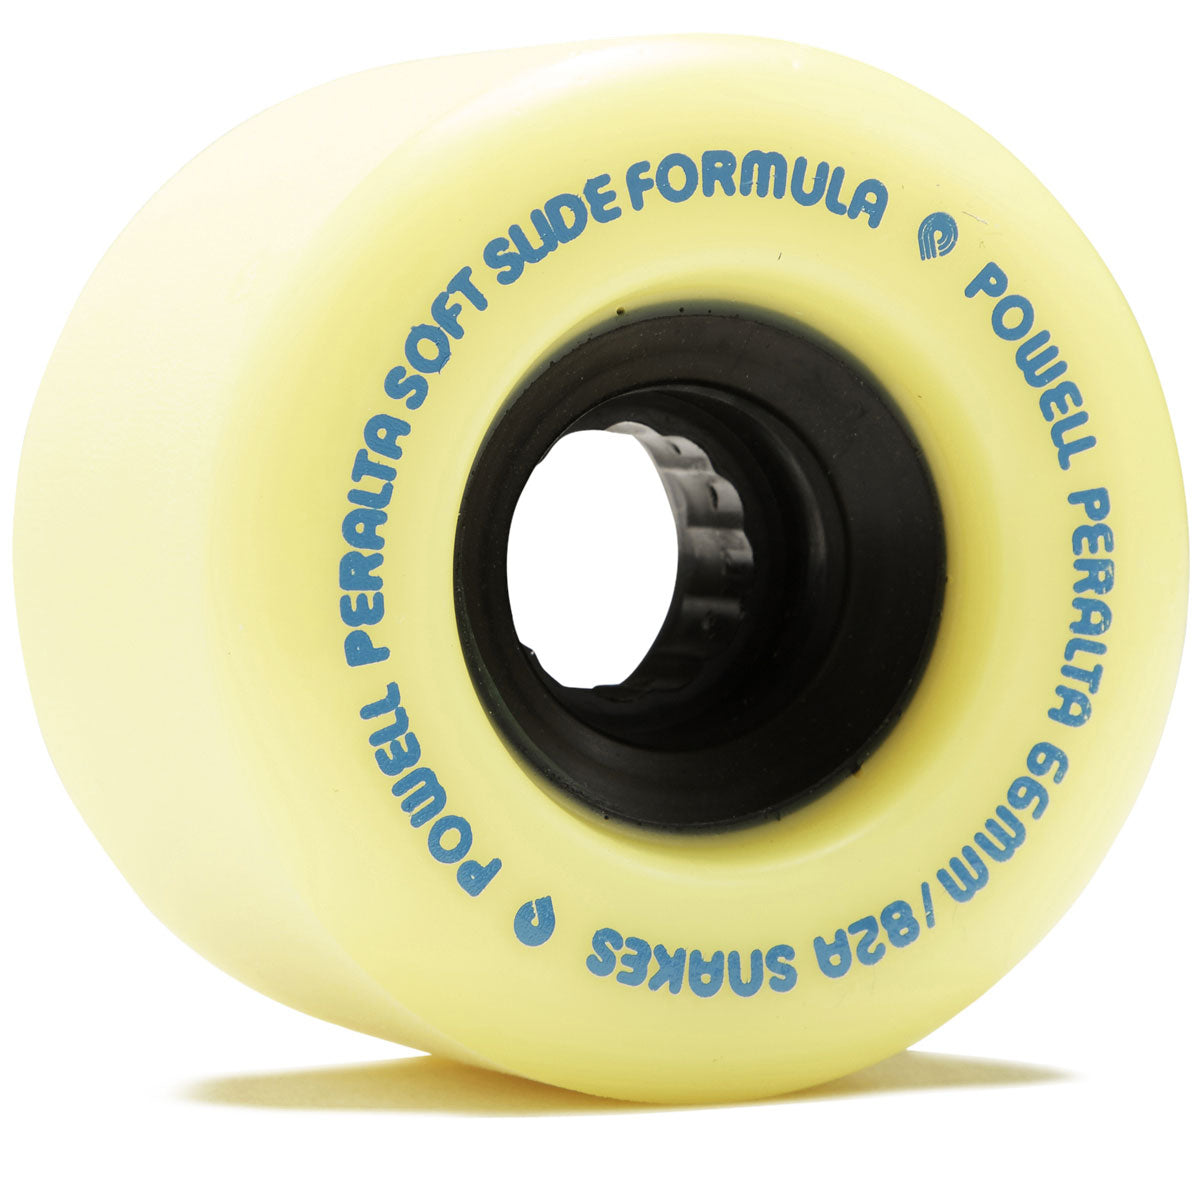 Powell-Peralta Snakes 82A Longboard Wheels - Yellow - 66mm image 1